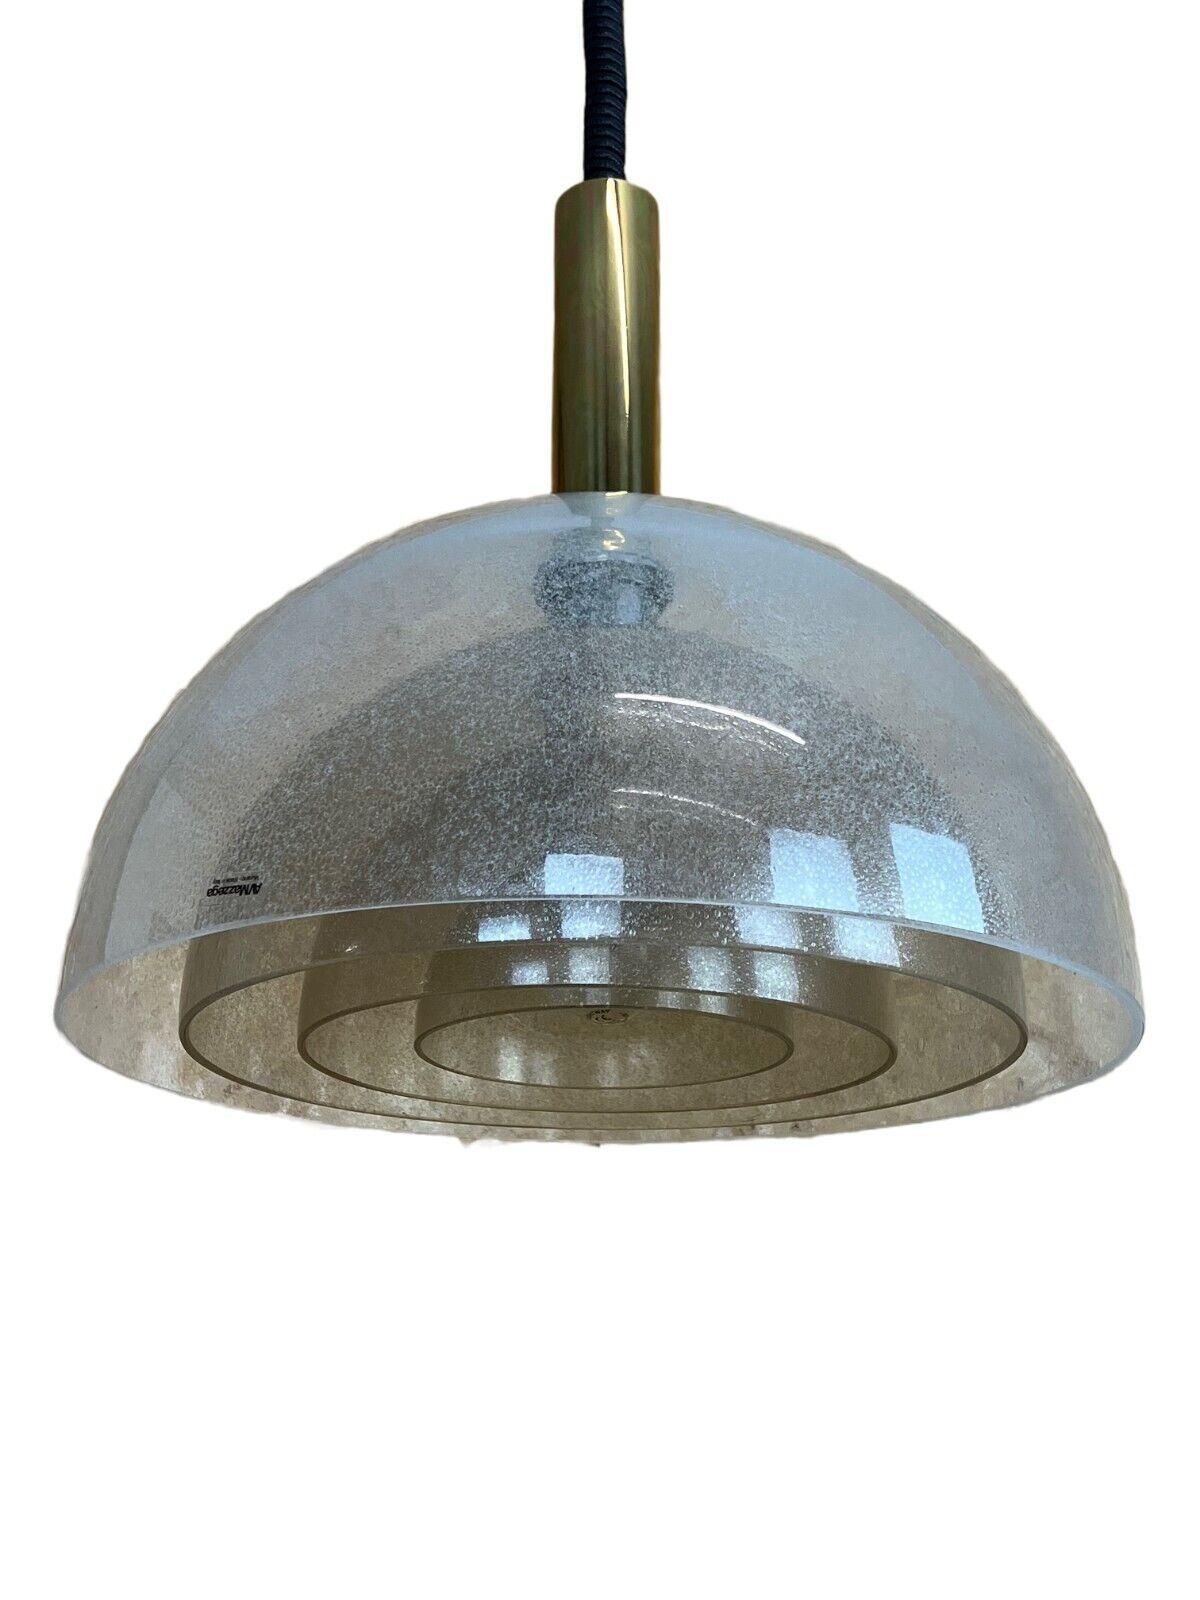 60s 70s Carlo Nason for Mazzega Puegoso glass chandelier lamp Design 1960s

Object: ceiling lamp

Manufacturer: Mazzega

Condition: good

Age: around 1960-1970

Dimensions:

Diameter = 46.5cm
Height = 46cm

Other notes:

E27